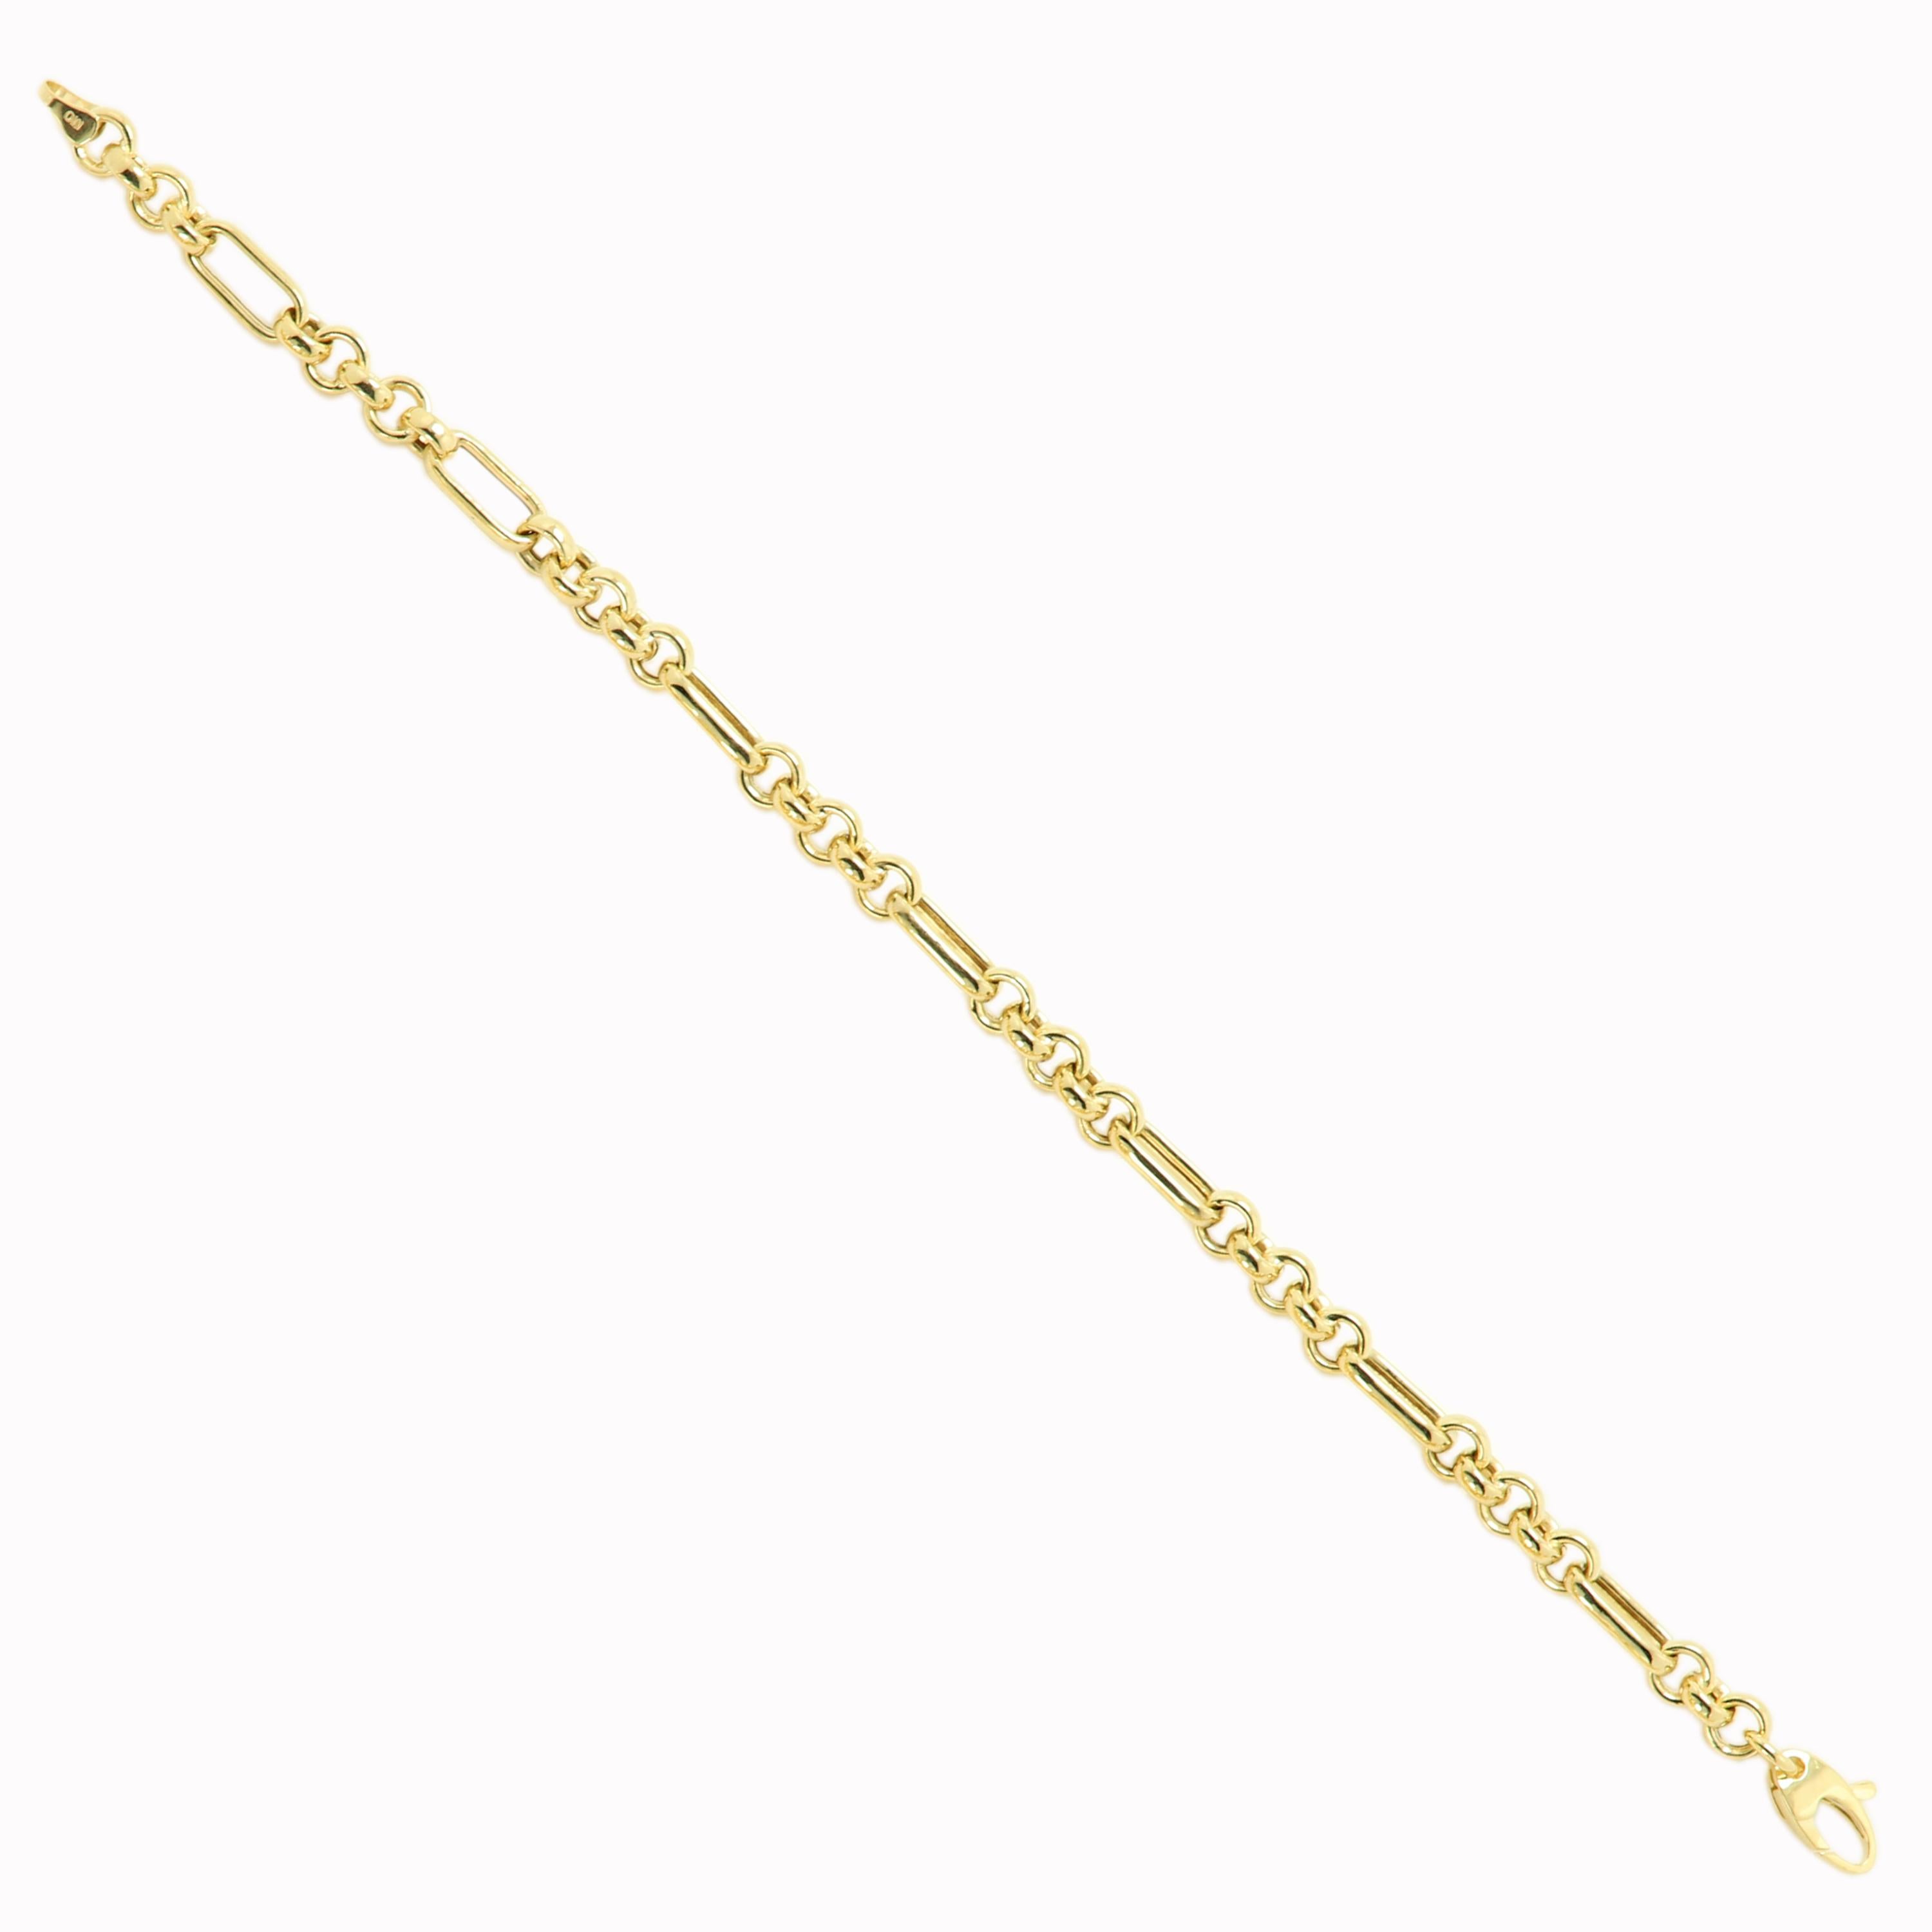 Beautiful Link Bracelet -  well made and very trendy look.
very elegant, Has a good balance between elegancy and trendy, not too bulky but not too thin either.
14k yellow gold 3.90 grams.
Length; 7.5' Inch
made In Italy.
approx individual link size